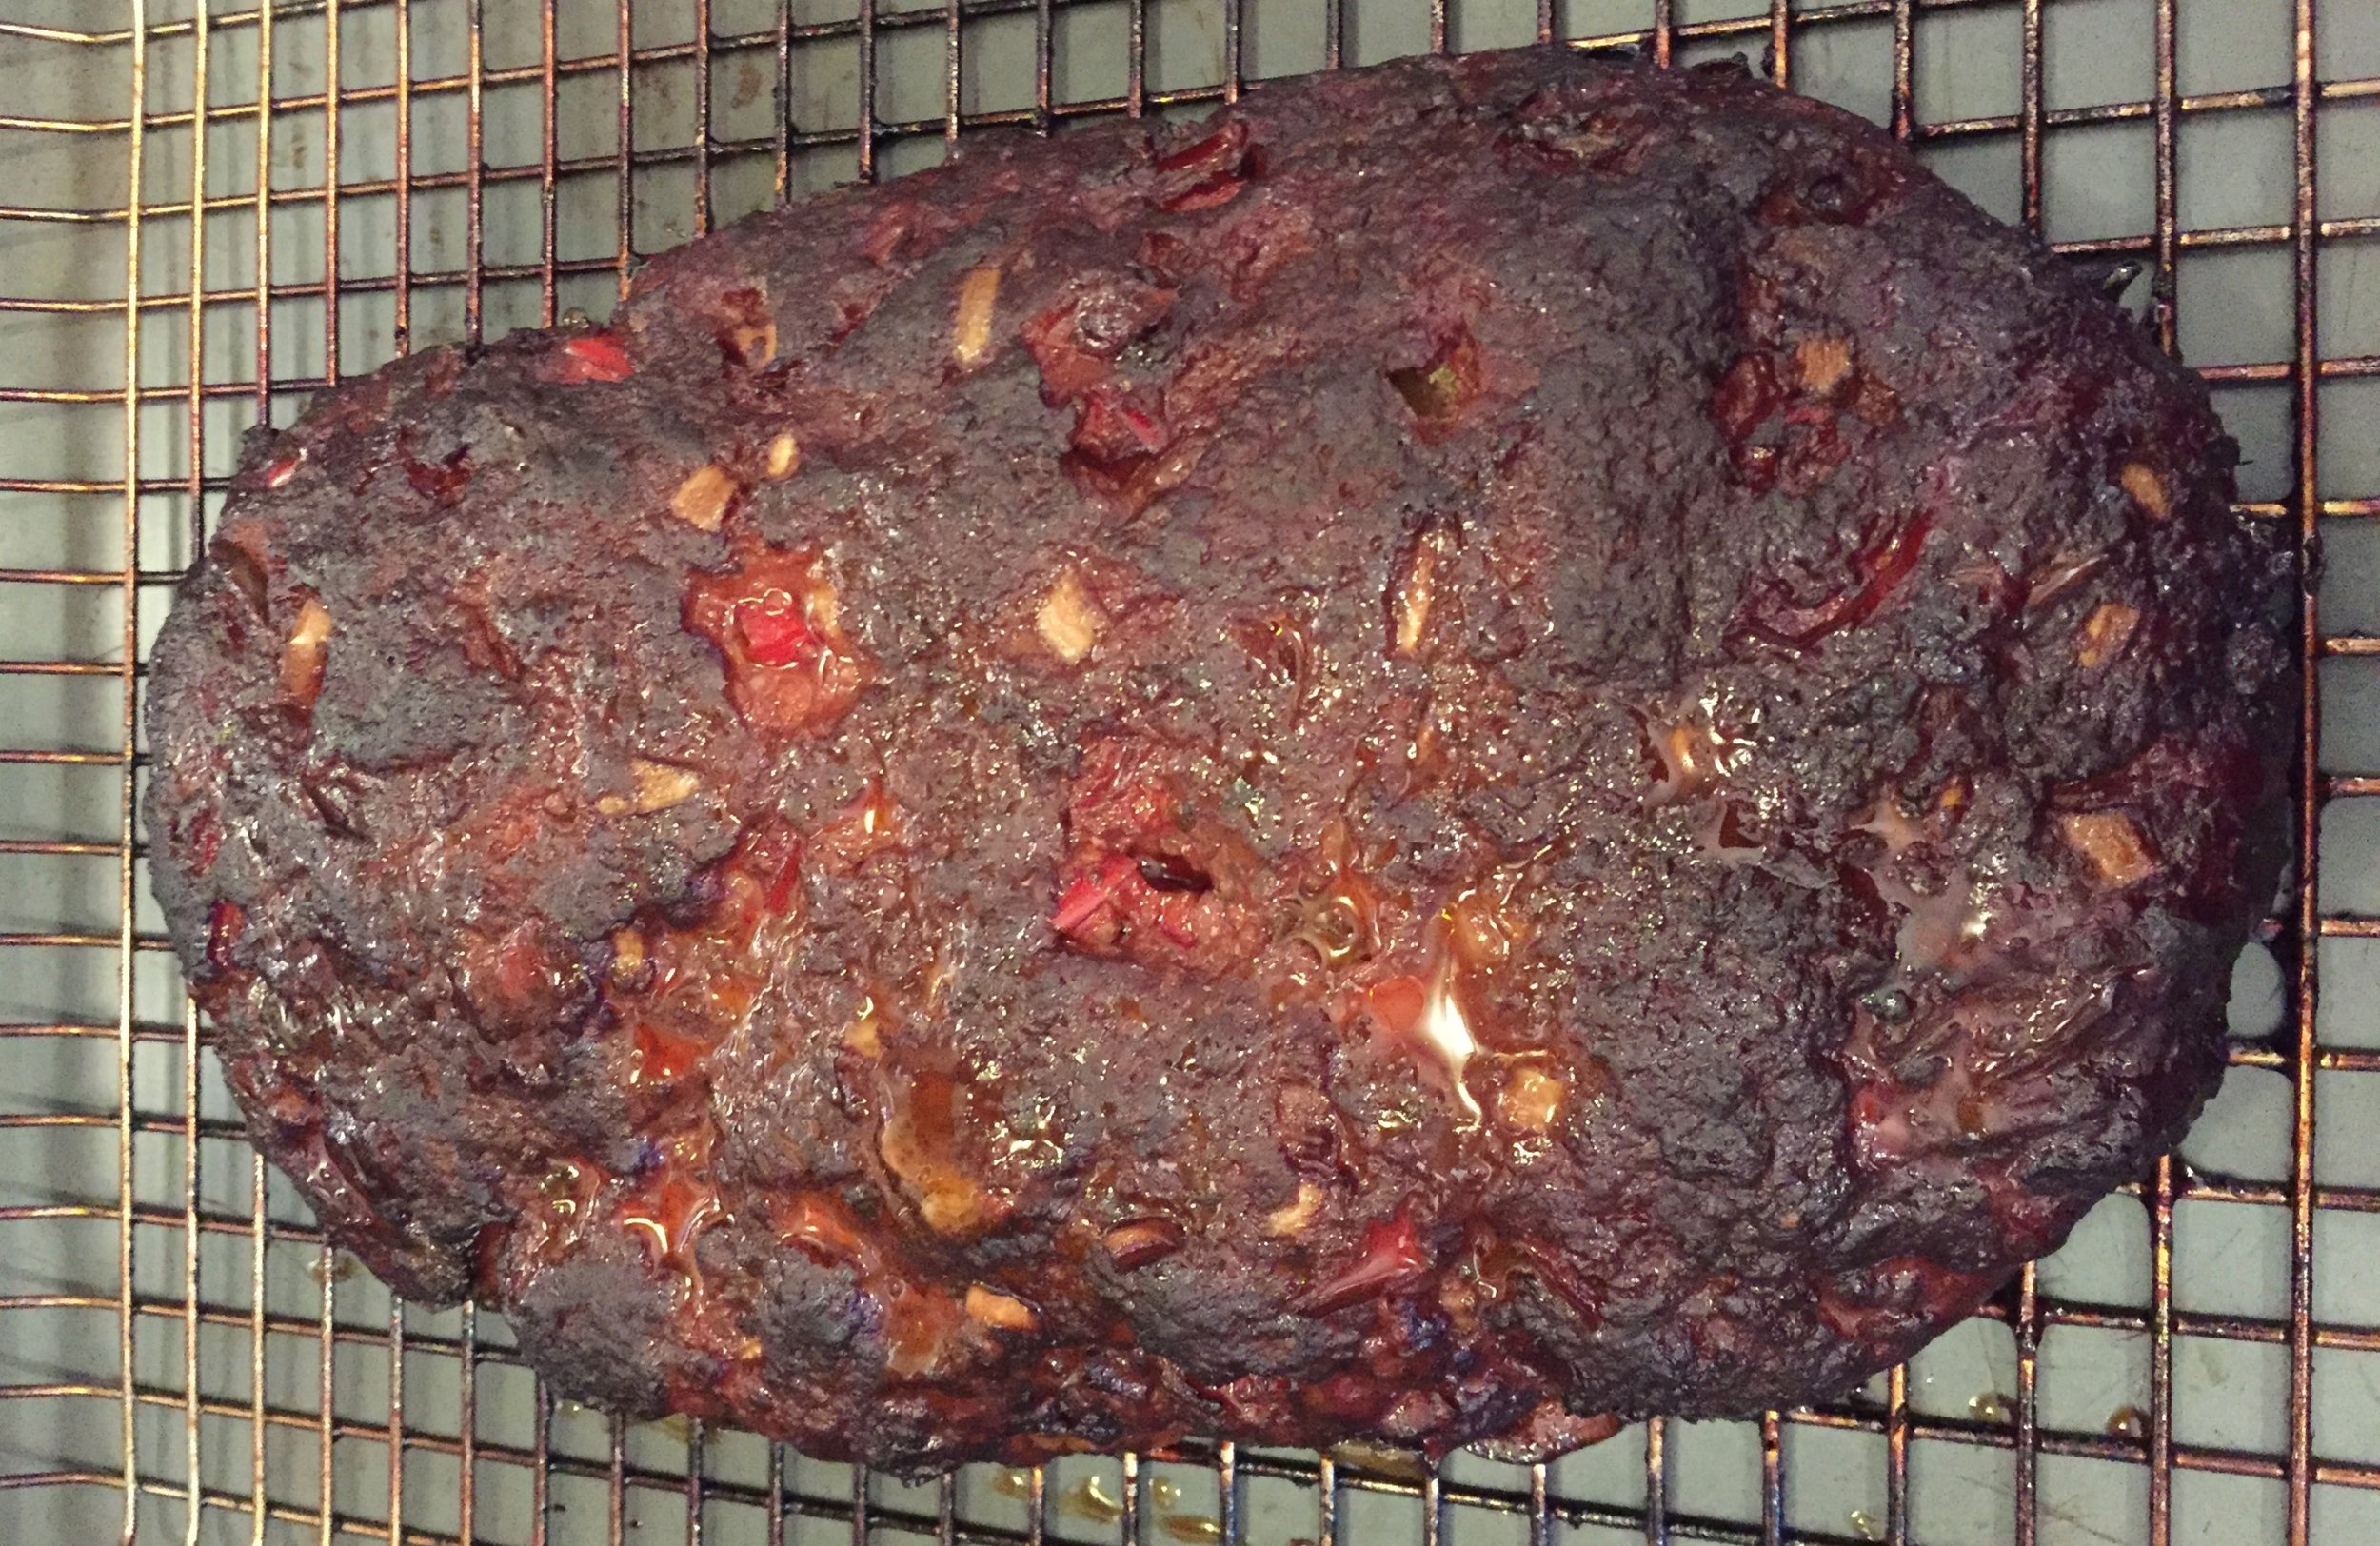 Primal Rub on Smoked Meatloaf